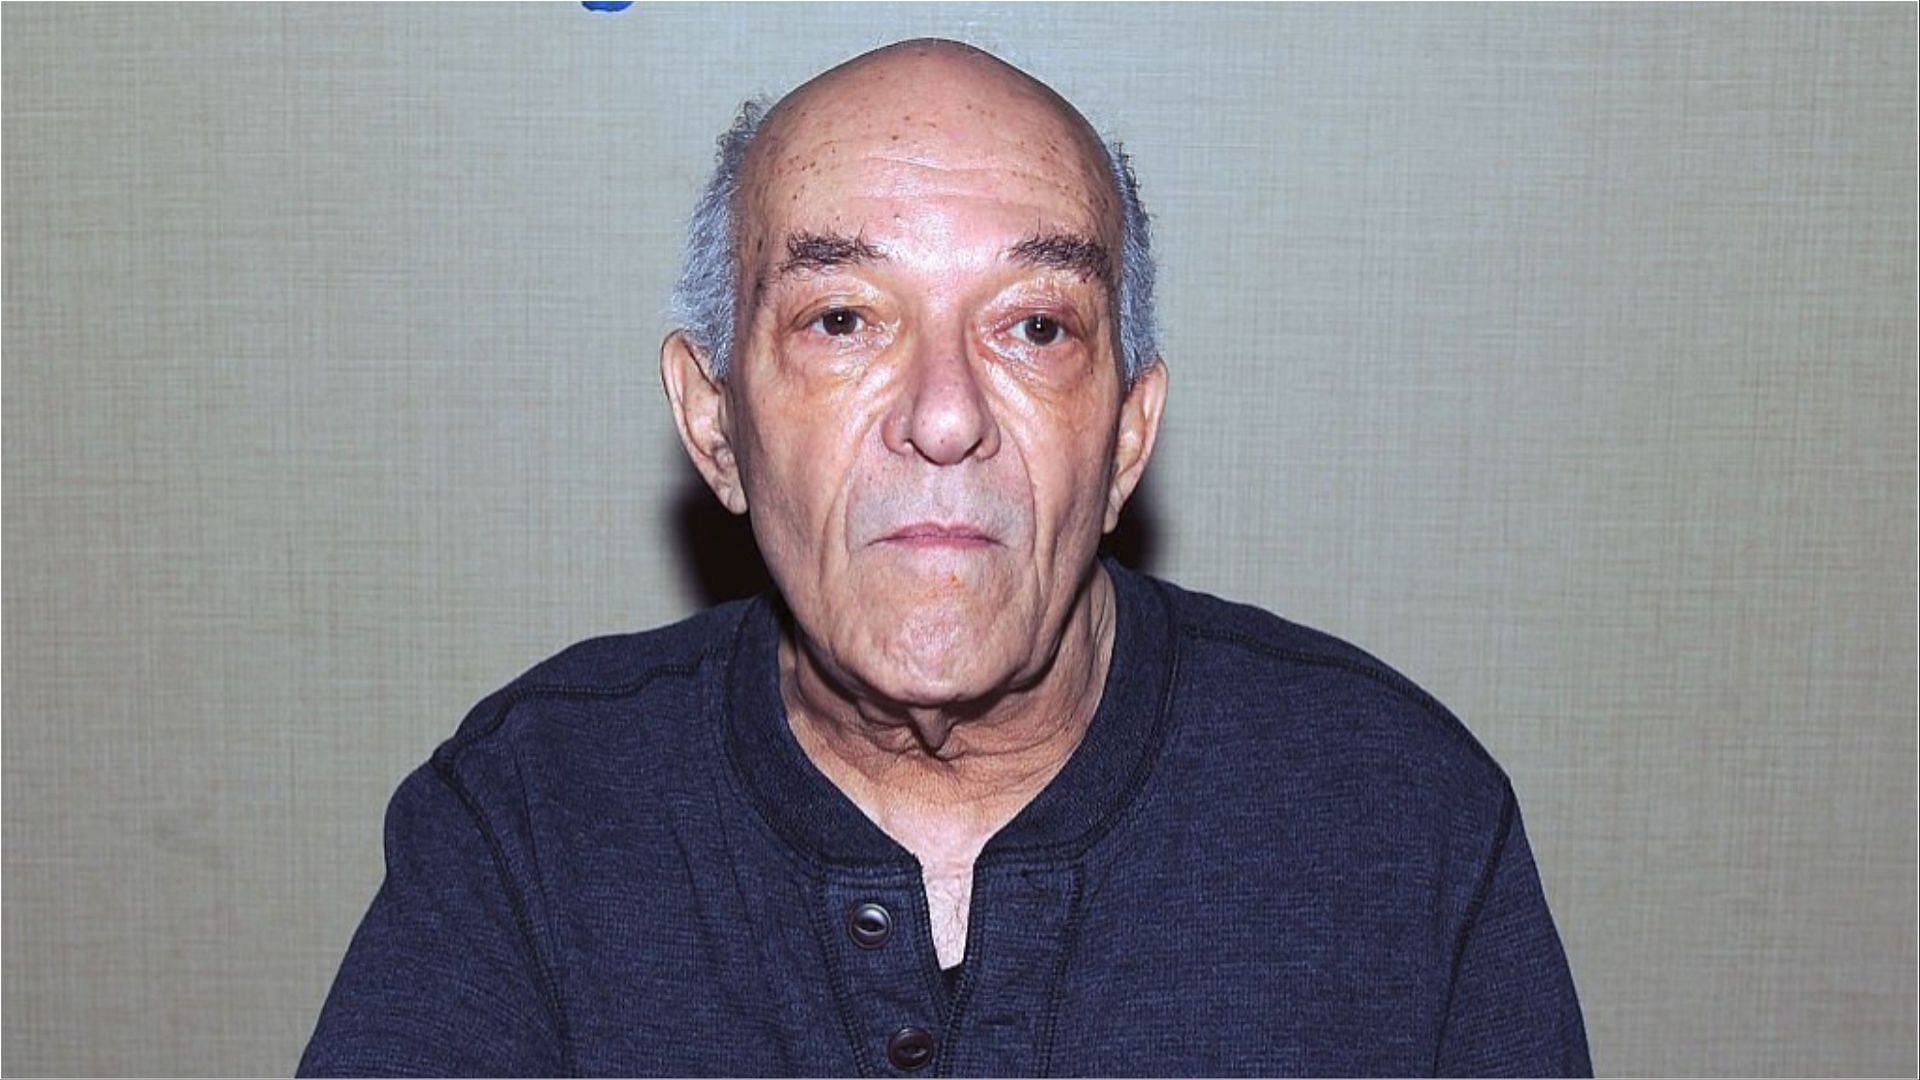 Mark Margolis accumulated a lot of wealth from his performances in films and TV shows (Image via Bobby Bank/Getty Images)